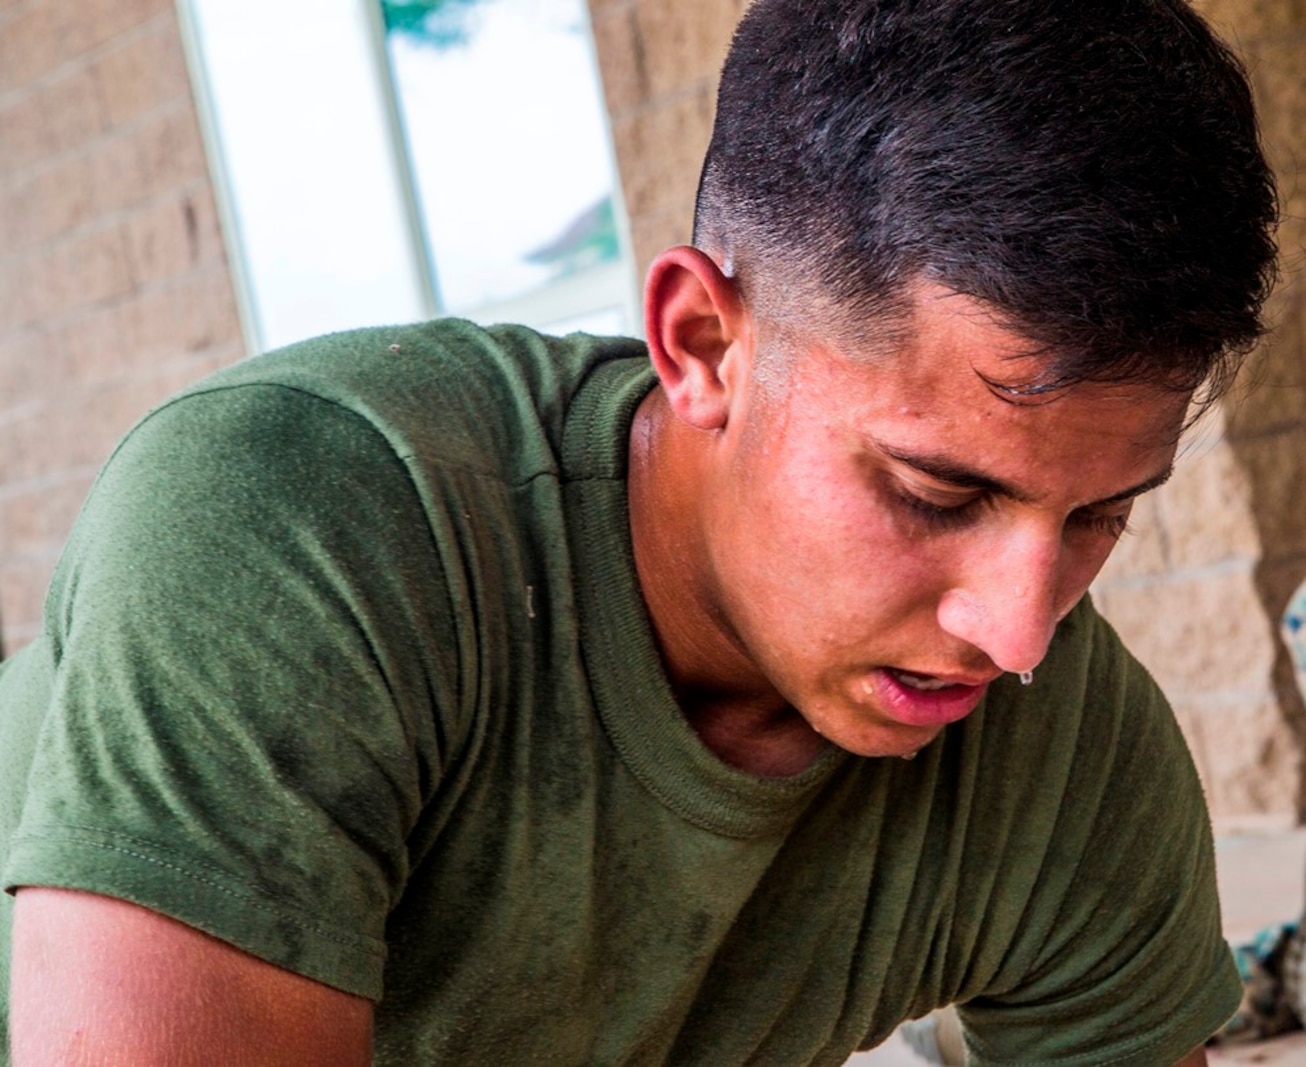 CAMP PENDLETON, Calif. – U.S. Marine Pfc. Mitchell Manuel, a field radio operator with Transportation Service Company, Combat Logistics Battalion 1, Combat Logistics Regiment 1, 1st Marine Logistics Group, recuperates after the practical application portion of a combat lifesaver course July 22, 2017. During a CLS course, Marines are put into a high-stress and intense environment aimed at heightening not only their war fighting skills, but also giving them a new skill set applying combat casualty care.  (U.S. Marine Corps Photo by Lance Cpl. Joseph Sorci)